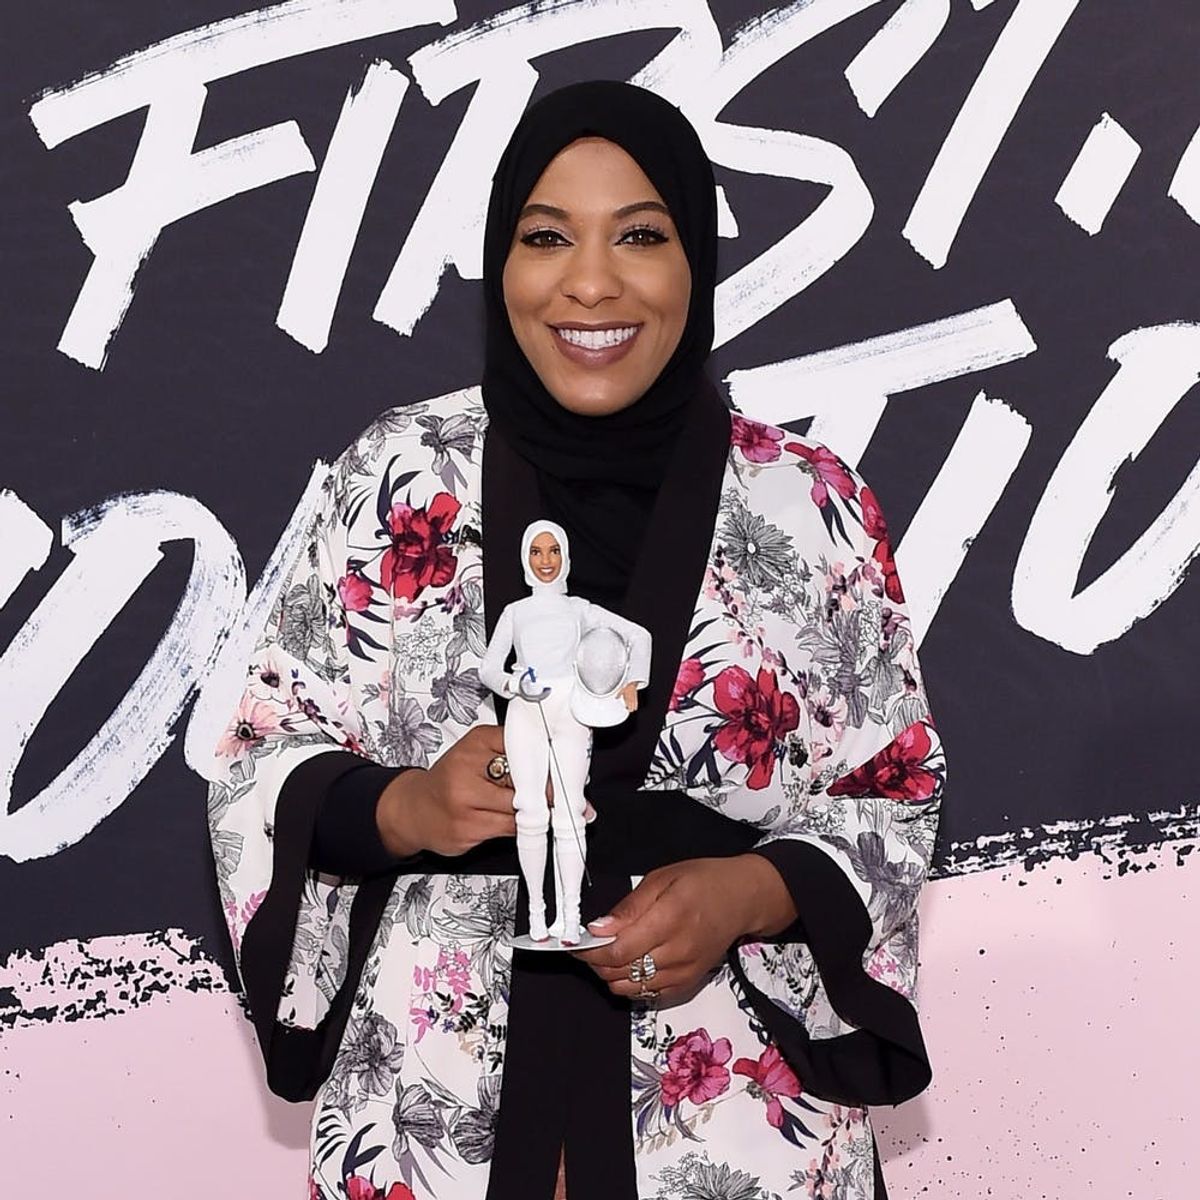 Mattel Is Releasing the First Barbie Doll to Wear a Hijab, in Honor of Ibtihaj Muhammad